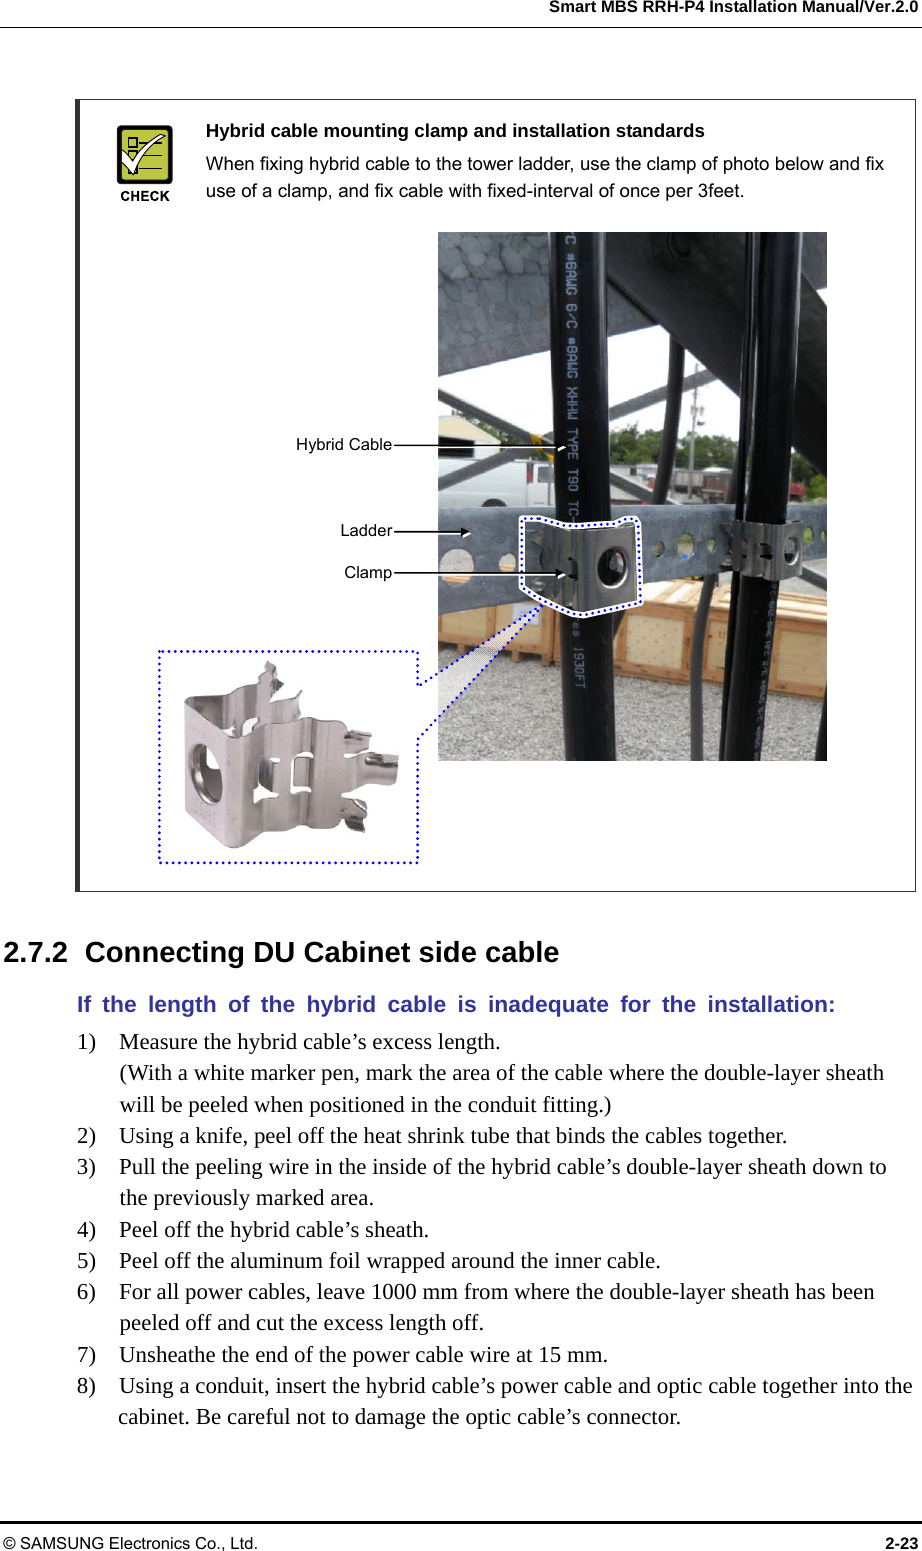  Smart MBS RRH-P4 Installation Manual/Ver.2.0 © SAMSUNG Electronics Co., Ltd.  2-23   Hybrid cable mounting clamp and installation standards   When fixing hybrid cable to the tower ladder, use the clamp of photo below and fix use of a clamp, and fix cable with fixed-interval of once per 3feet.                       2.7.2  Connecting DU Cabinet side cable If the length of the hybrid cable is inadequate for the installation: 1)    Measure the hybrid cable’s excess length. (With a white marker pen, mark the area of the cable where the double-layer sheath will be peeled when positioned in the conduit fitting.) 2)    Using a knife, peel off the heat shrink tube that binds the cables together. 3)    Pull the peeling wire in the inside of the hybrid cable’s double-layer sheath down to the previously marked area. 4)    Peel off the hybrid cable’s sheath. 5)    Peel off the aluminum foil wrapped around the inner cable. 6)    For all power cables, leave 1000 mm from where the double-layer sheath has been peeled off and cut the excess length off. 7)    Unsheathe the end of the power cable wire at 15 mm. 8)    Using a conduit, insert the hybrid cable’s power cable and optic cable together into the cabinet. Be careful not to damage the optic cable’s connector. ClampLadderHybrid Cable 